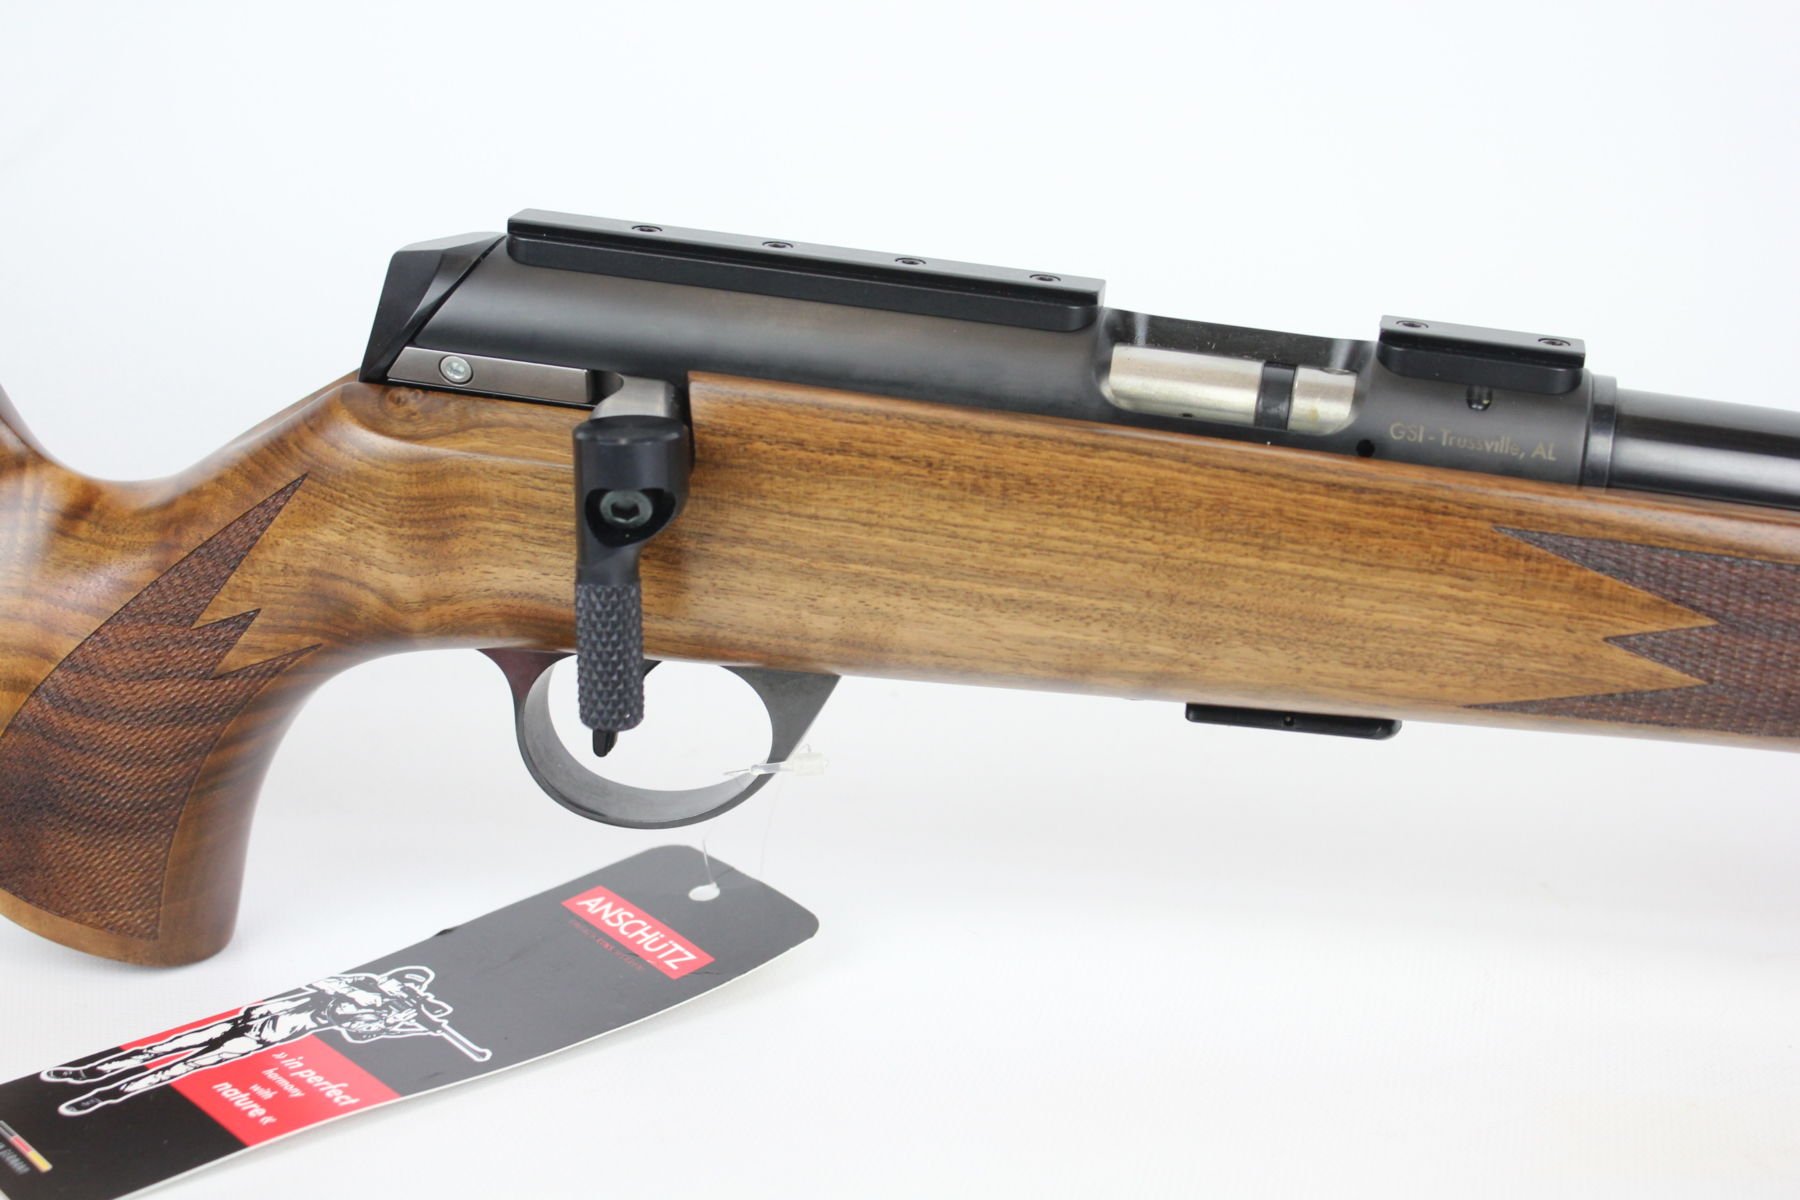 Anschutz 1727 F receiver, chambered in .22 LR